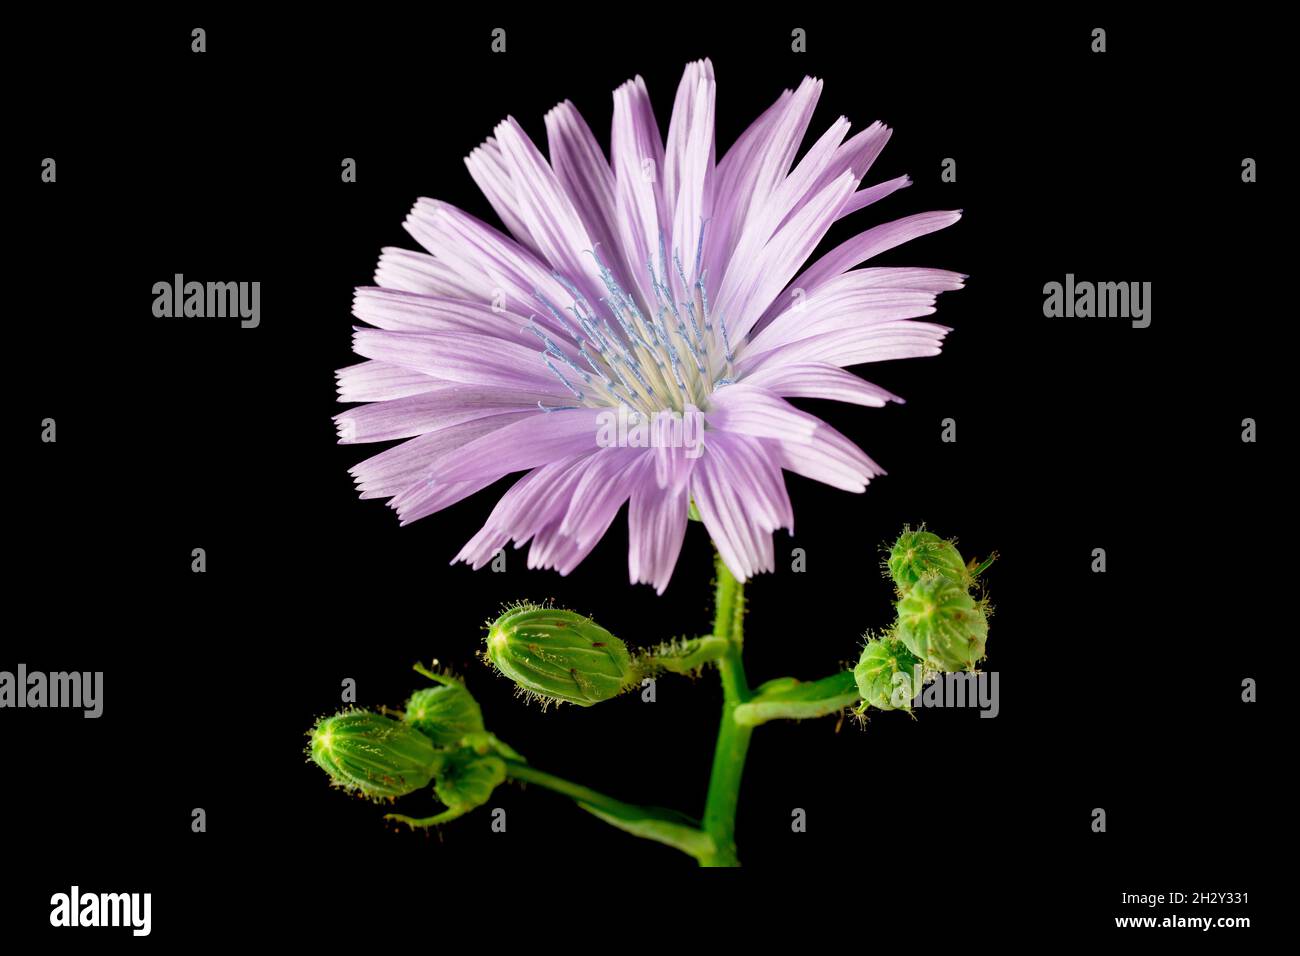 Blue Sowthistle (cicerbita macrophylla), a still life close up of an open flower with buds isolated against a black background Stock Photo